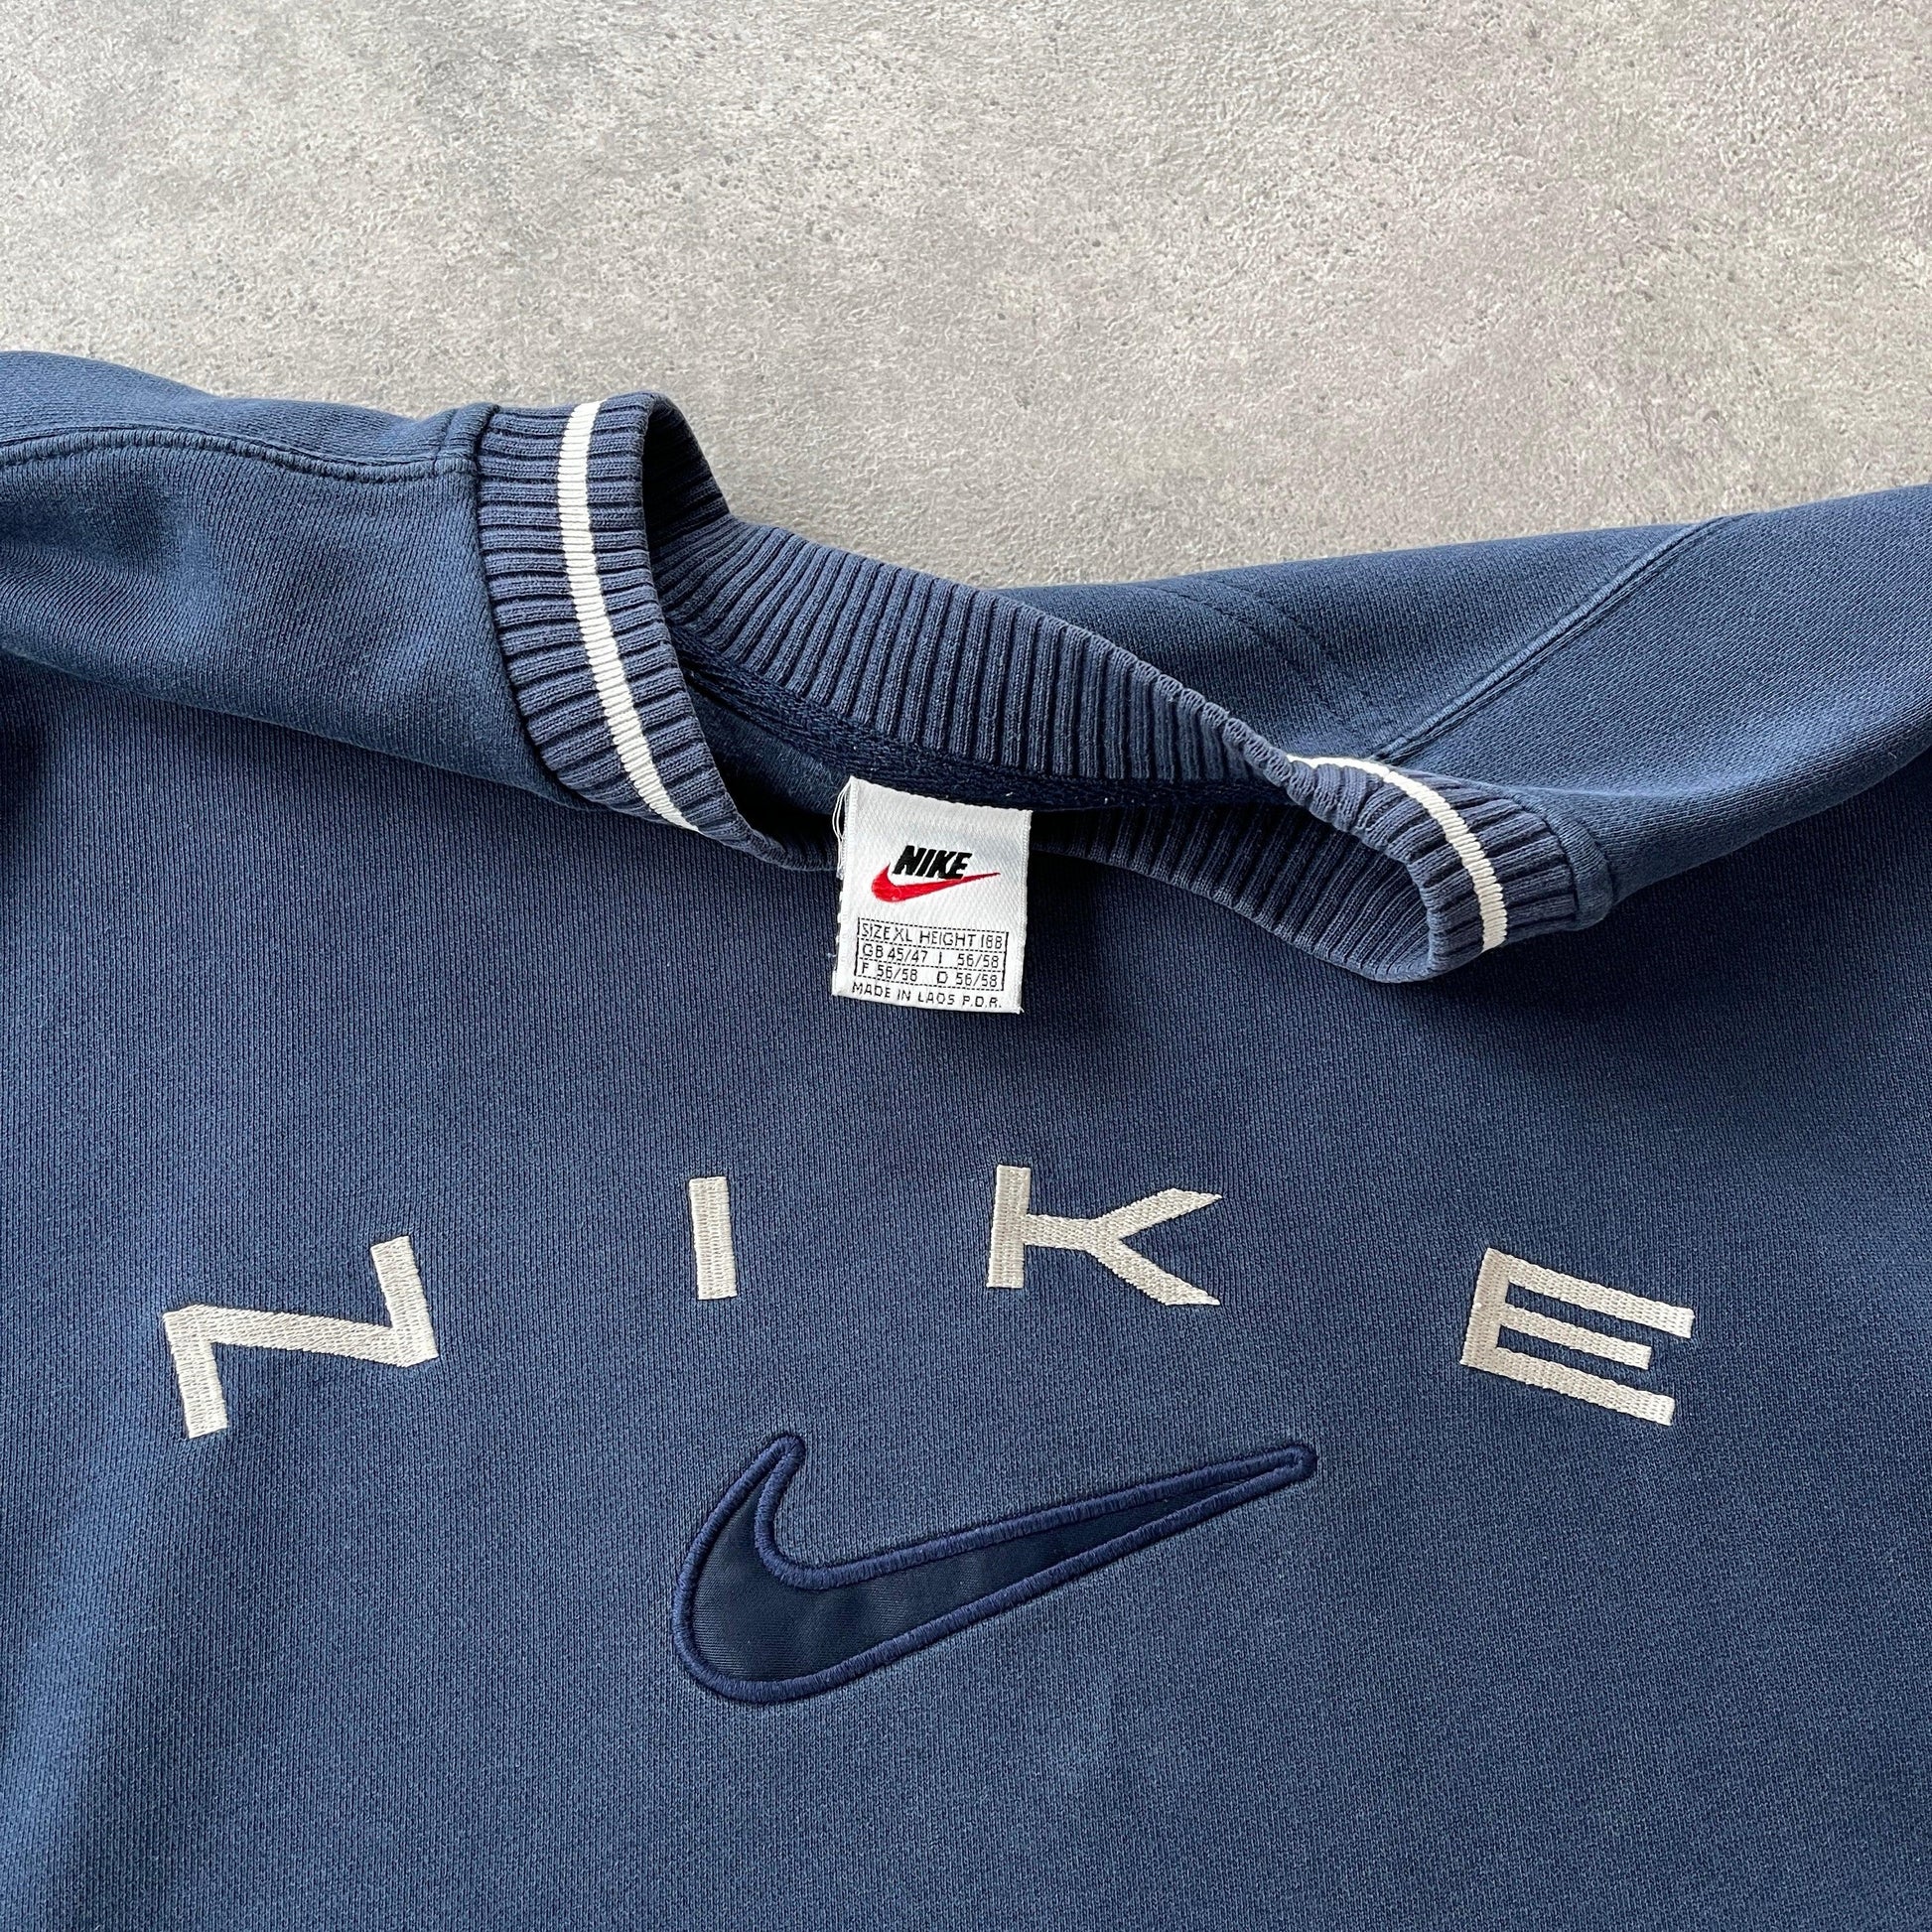 Nike RARE 1990s heavyweight embroidered spellout sweatshirt (XL) - Known Source